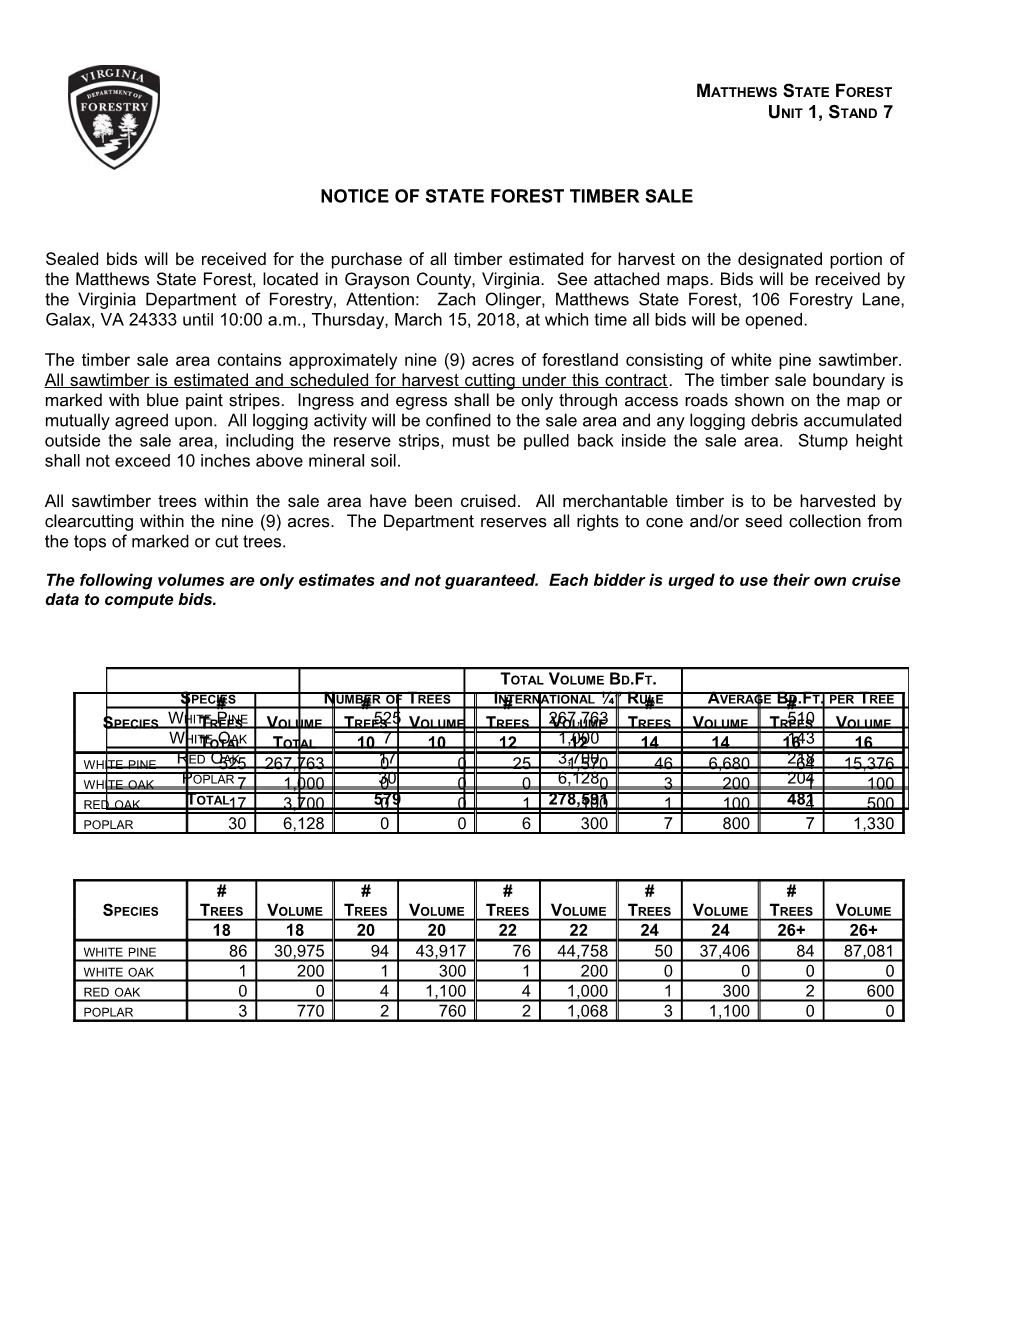 Notice of Stateforest Timber Sale